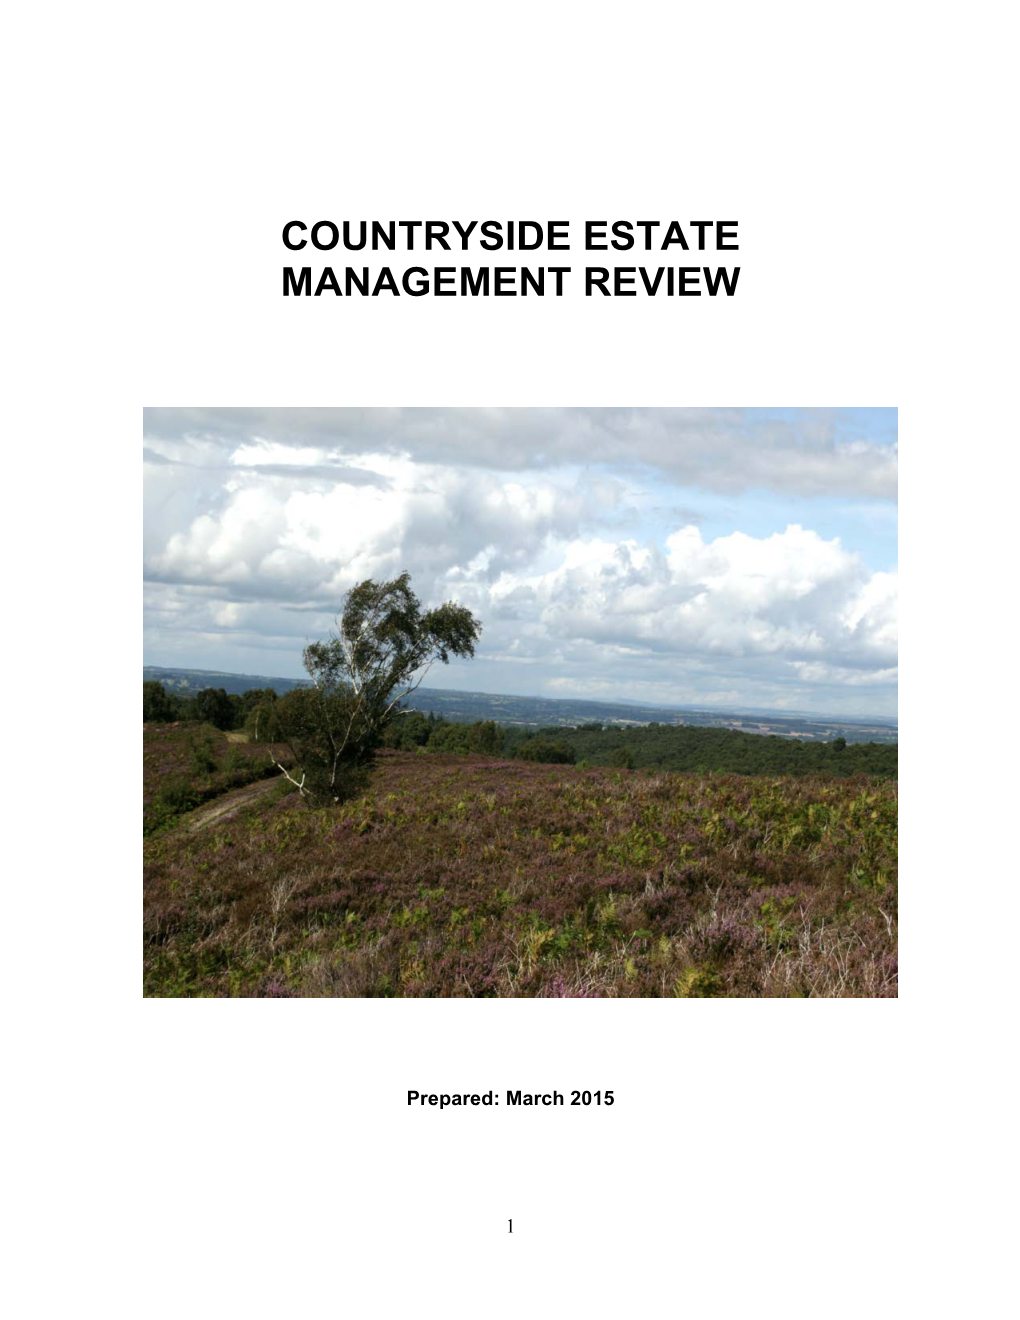 Countryside Estate Management Review